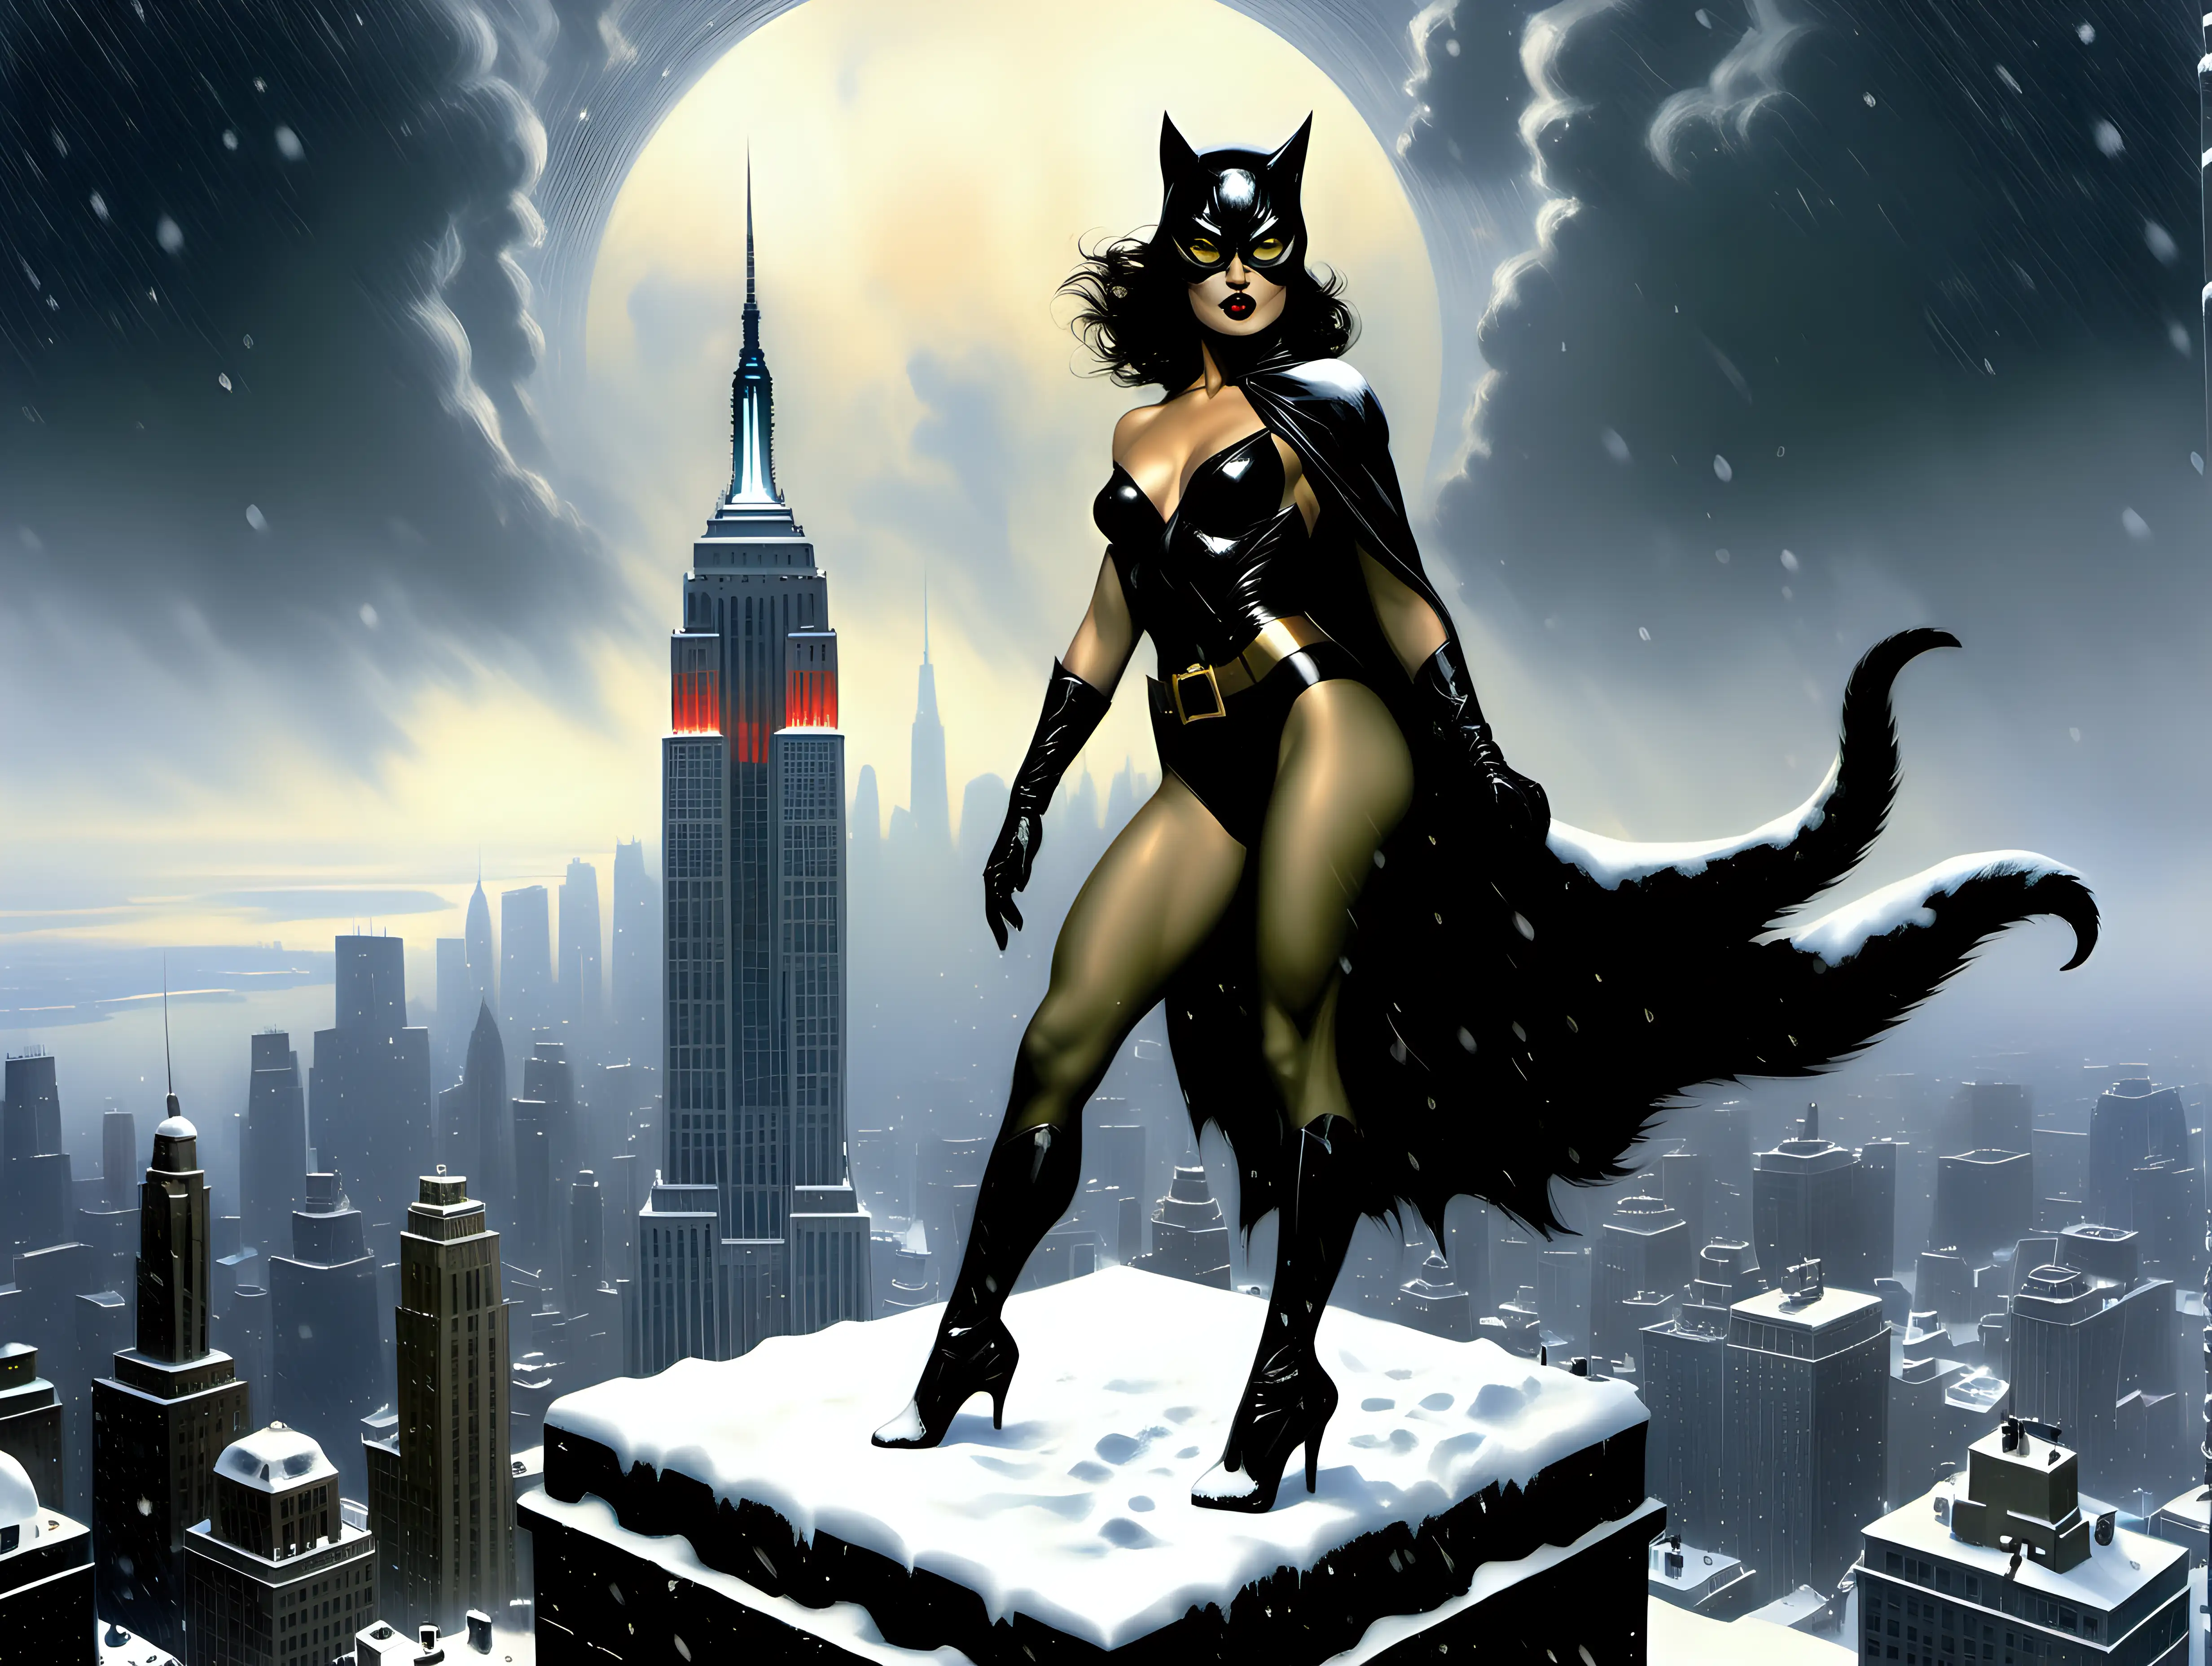 Cat Woman atop Empire State Building in Frank Frazetta Snowstorm